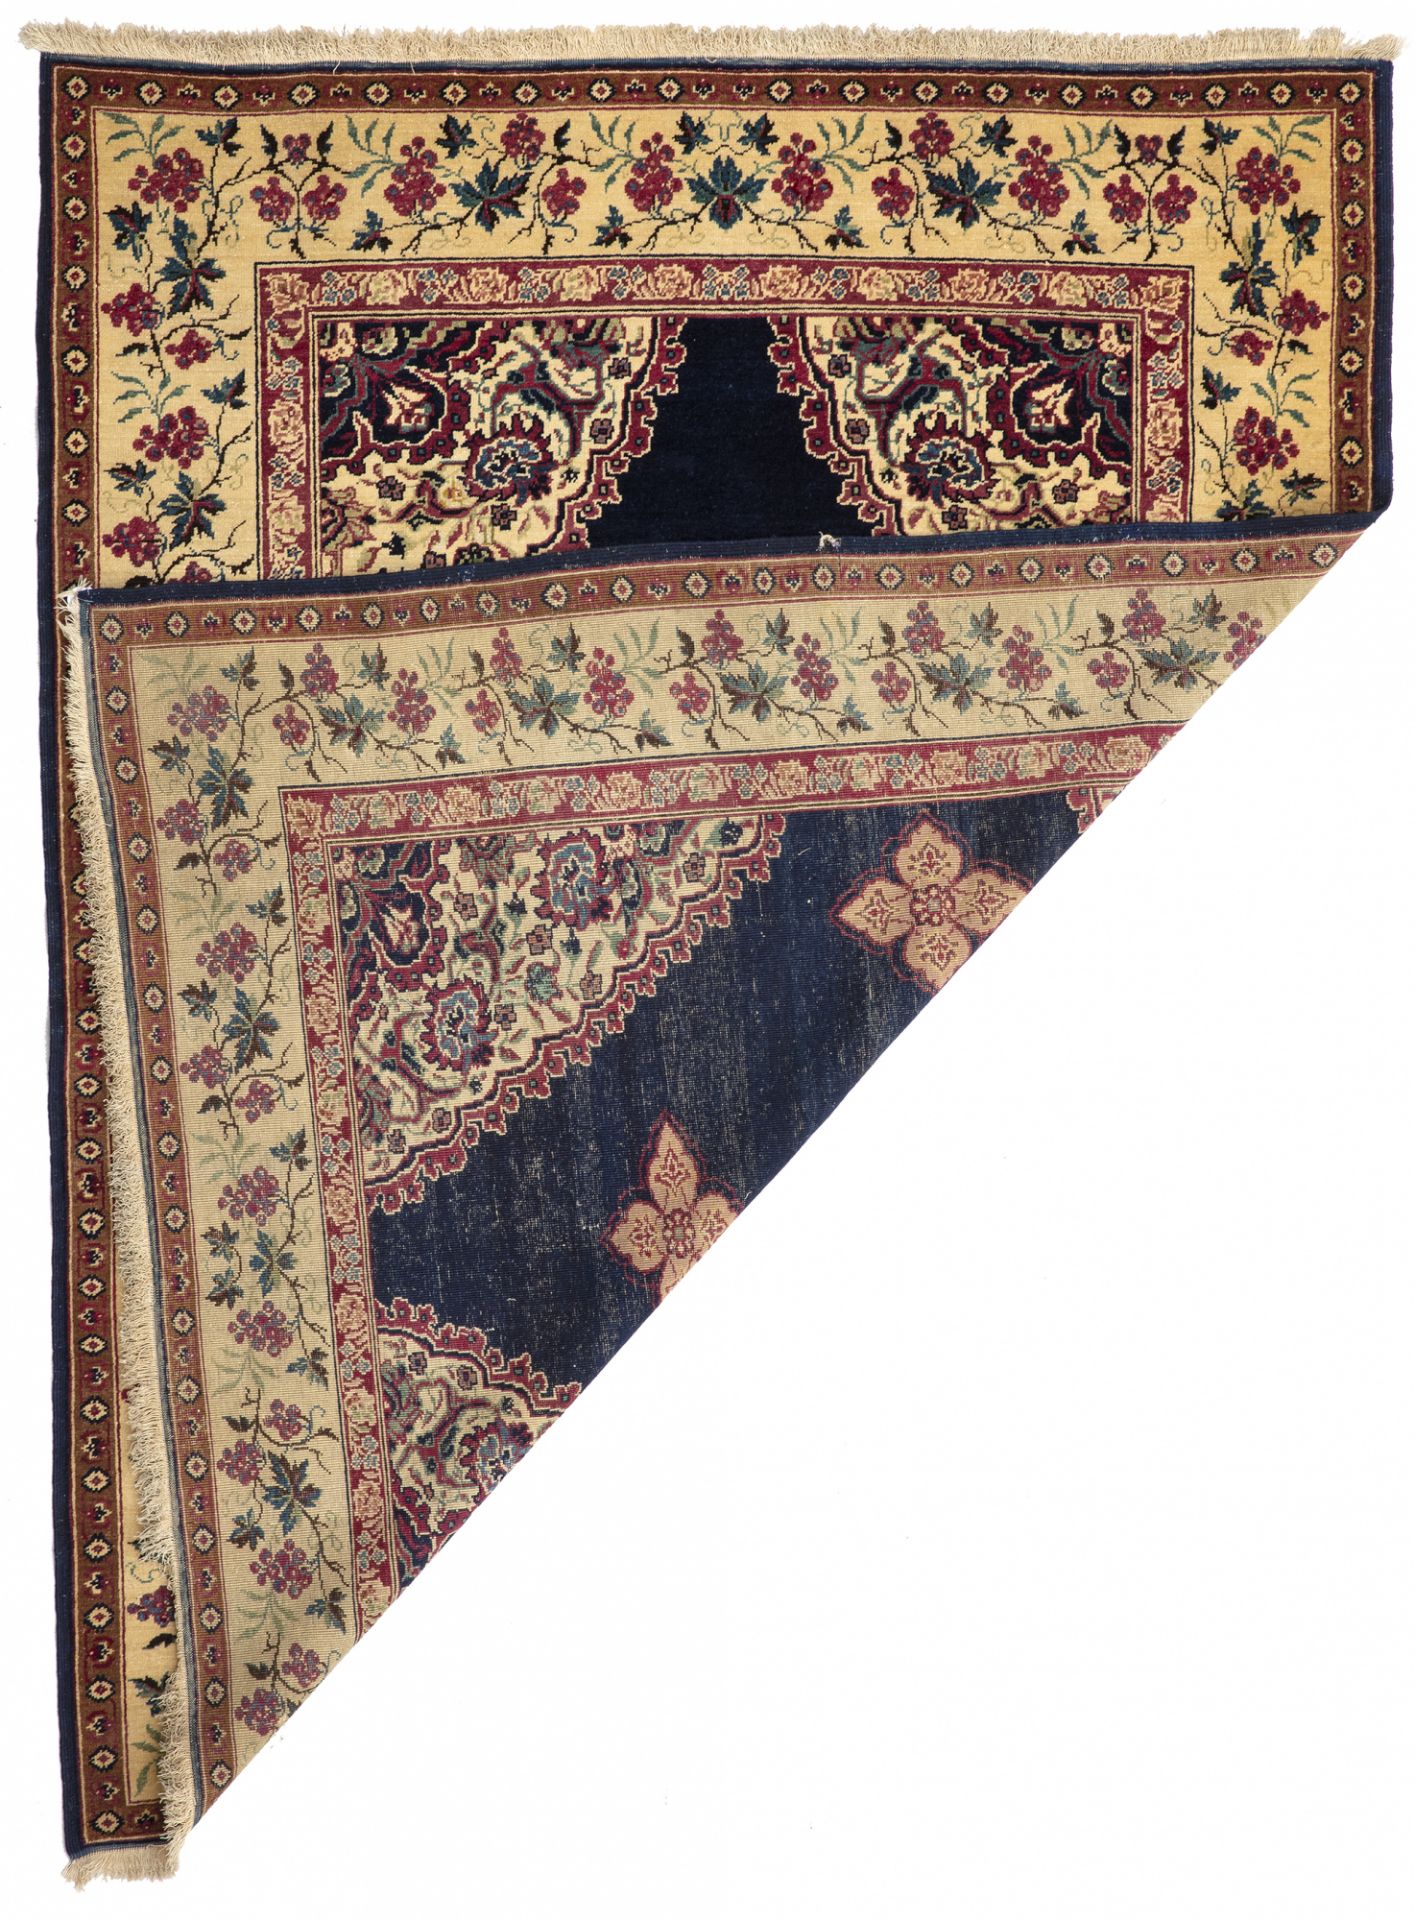 A FERAHAN RUG, EARLY 20TH CENTURY - Image 2 of 2